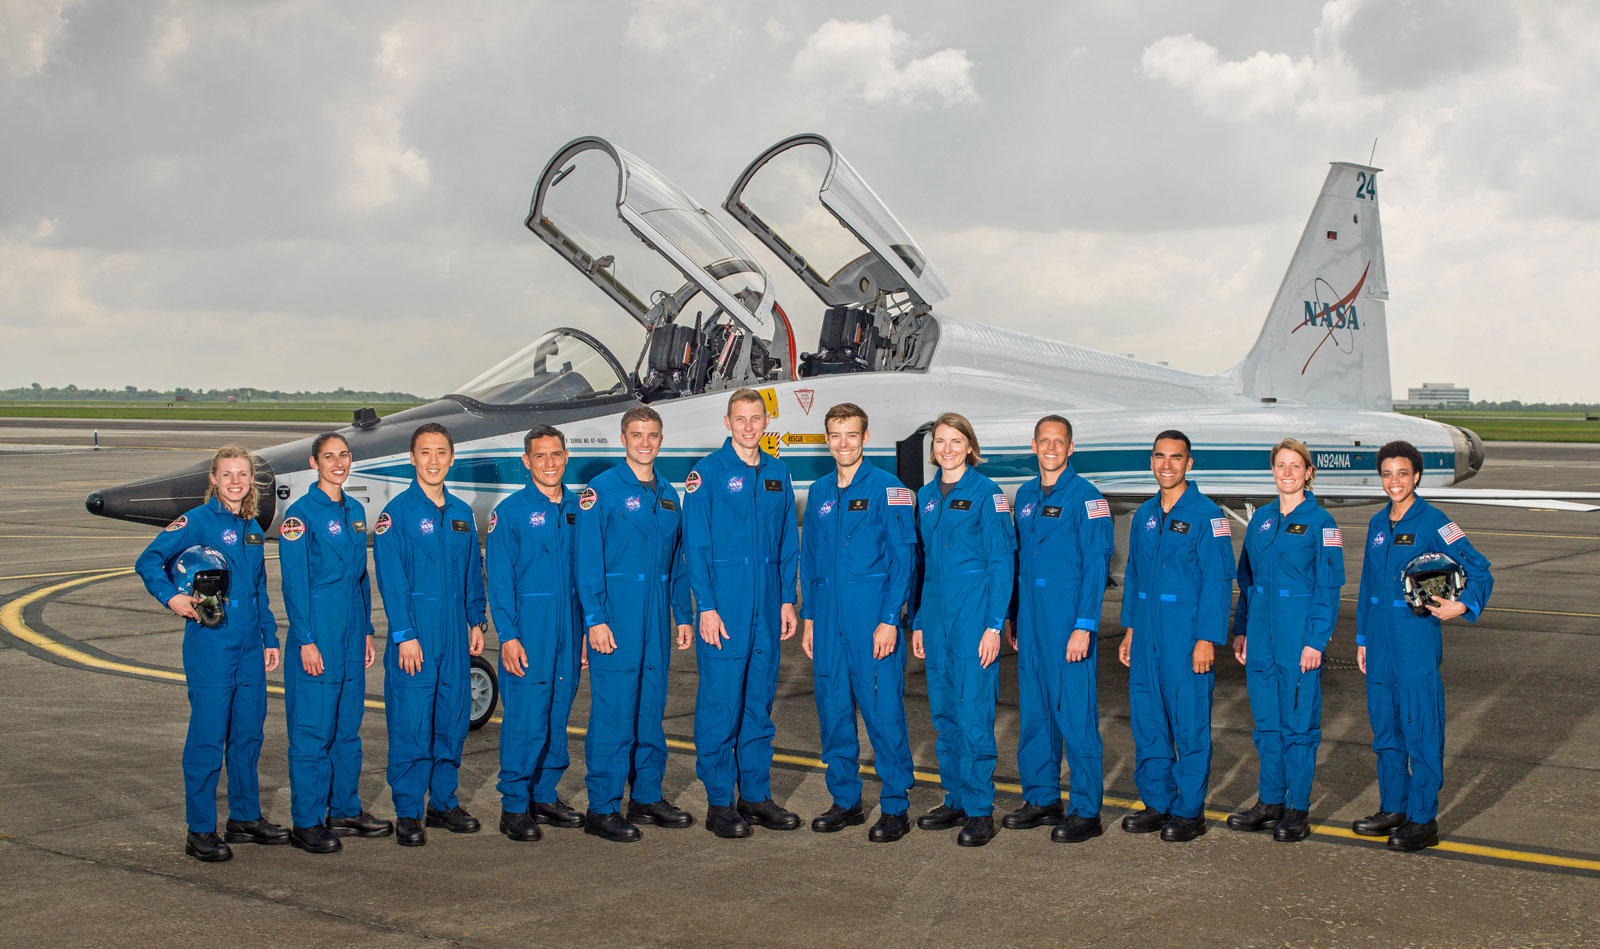 Formed by 22 people, a team of NASA astronauts for future space missions